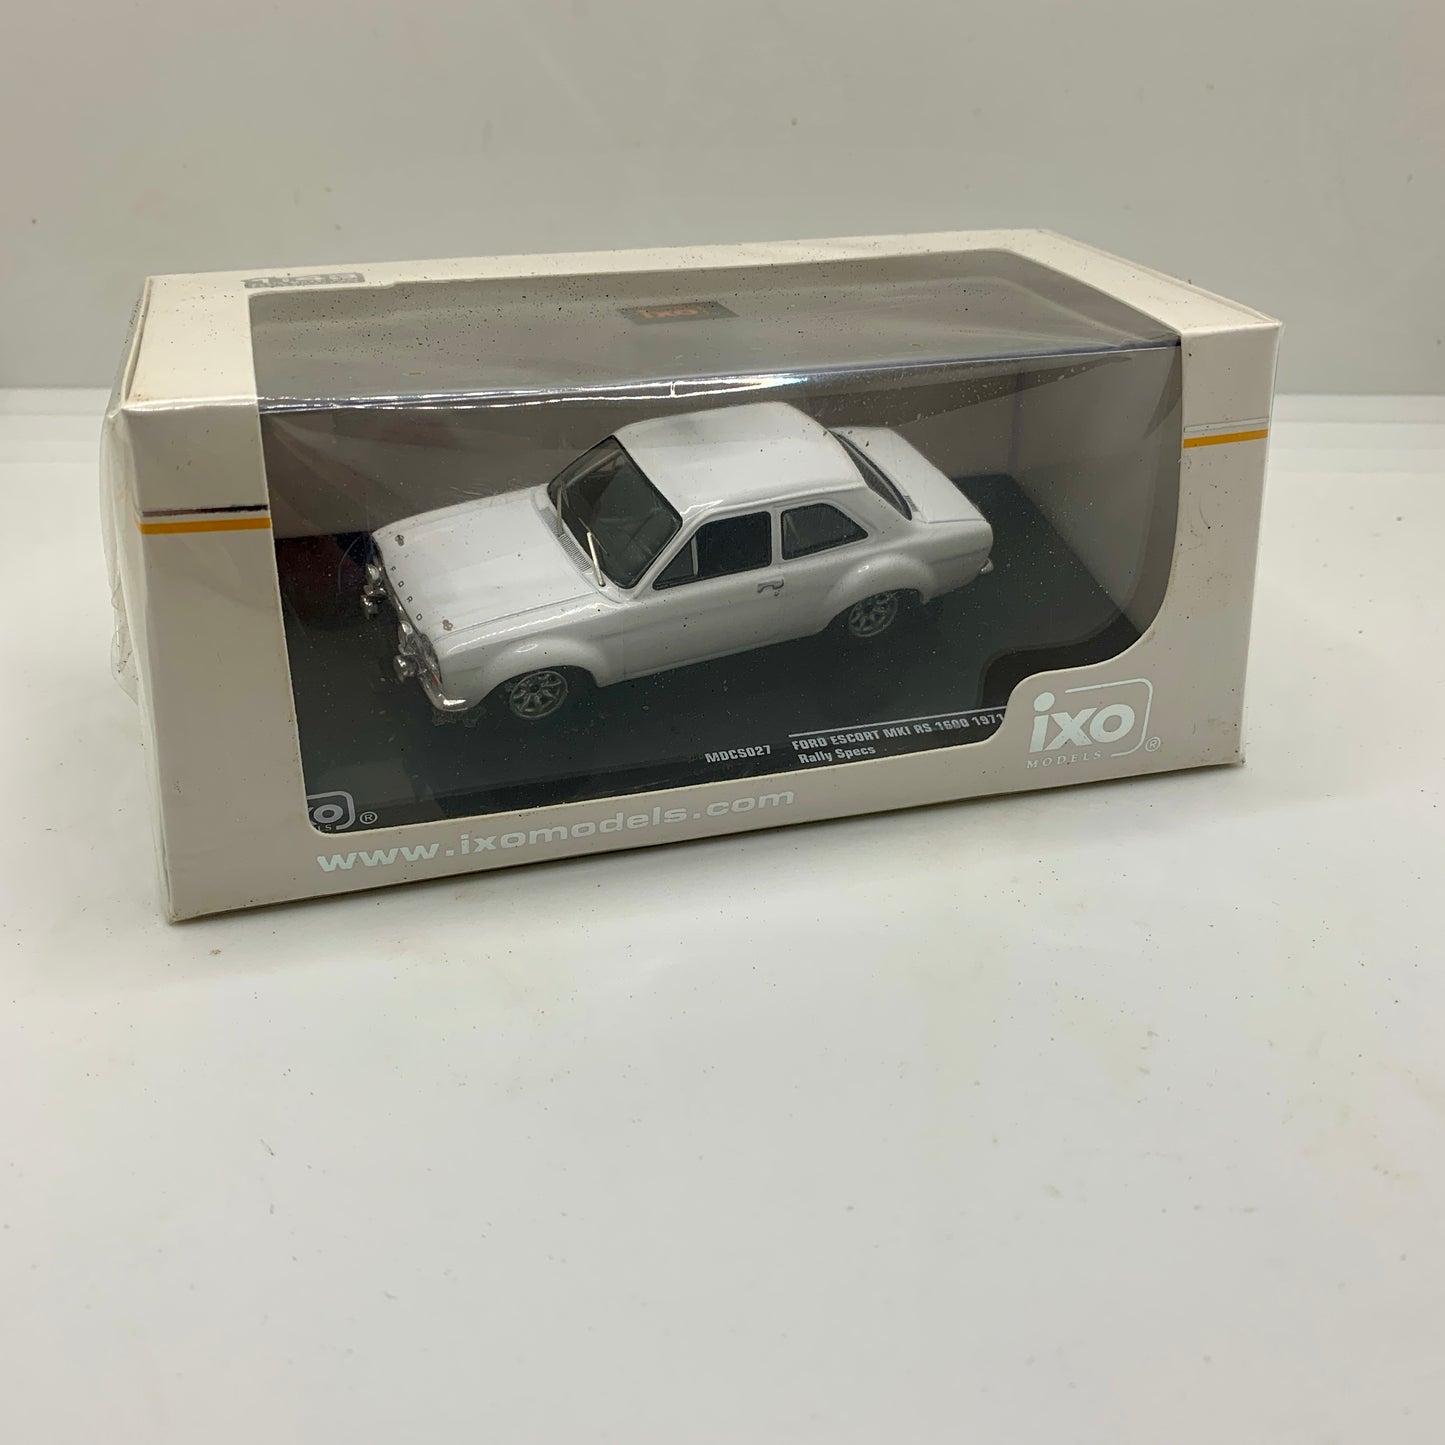 Iconic Ford Escort Collectable Classic Cars 1/43 Scale